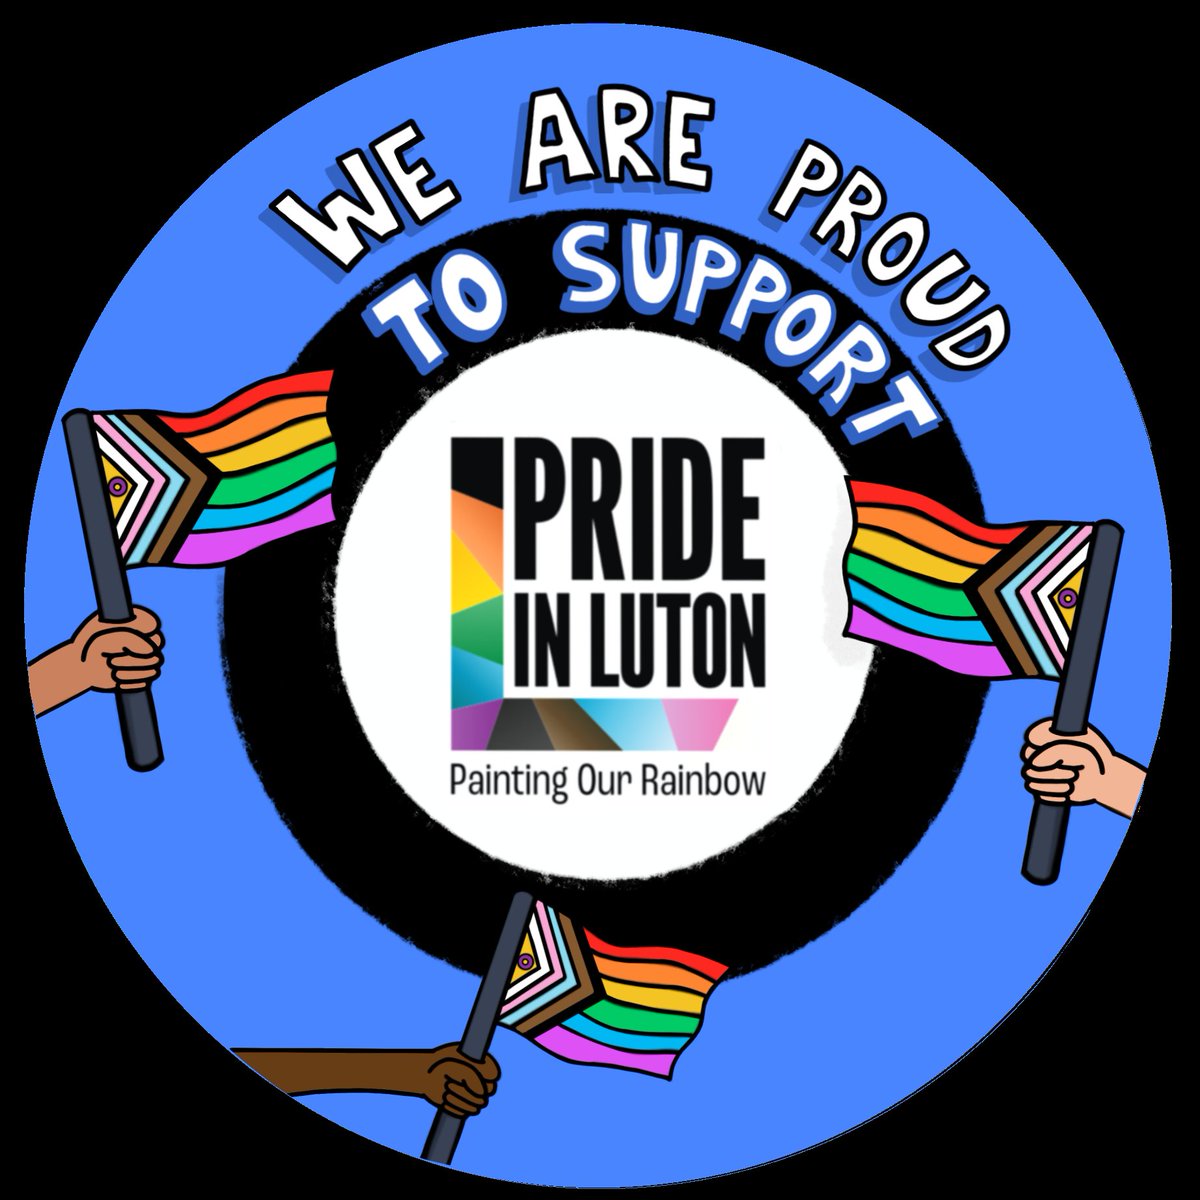 Are you a small business in Luton and want to support Pride in Luton? For only £60 you will get 🏳️‍🌈 Listed on our small business supporters page 🏳️‍⚧️ Shout out on socials 🏳️‍🌈 Rainbow bunting for your business 🏳️‍⚧️ Supporters window sticker Email committee@prideinluton.org